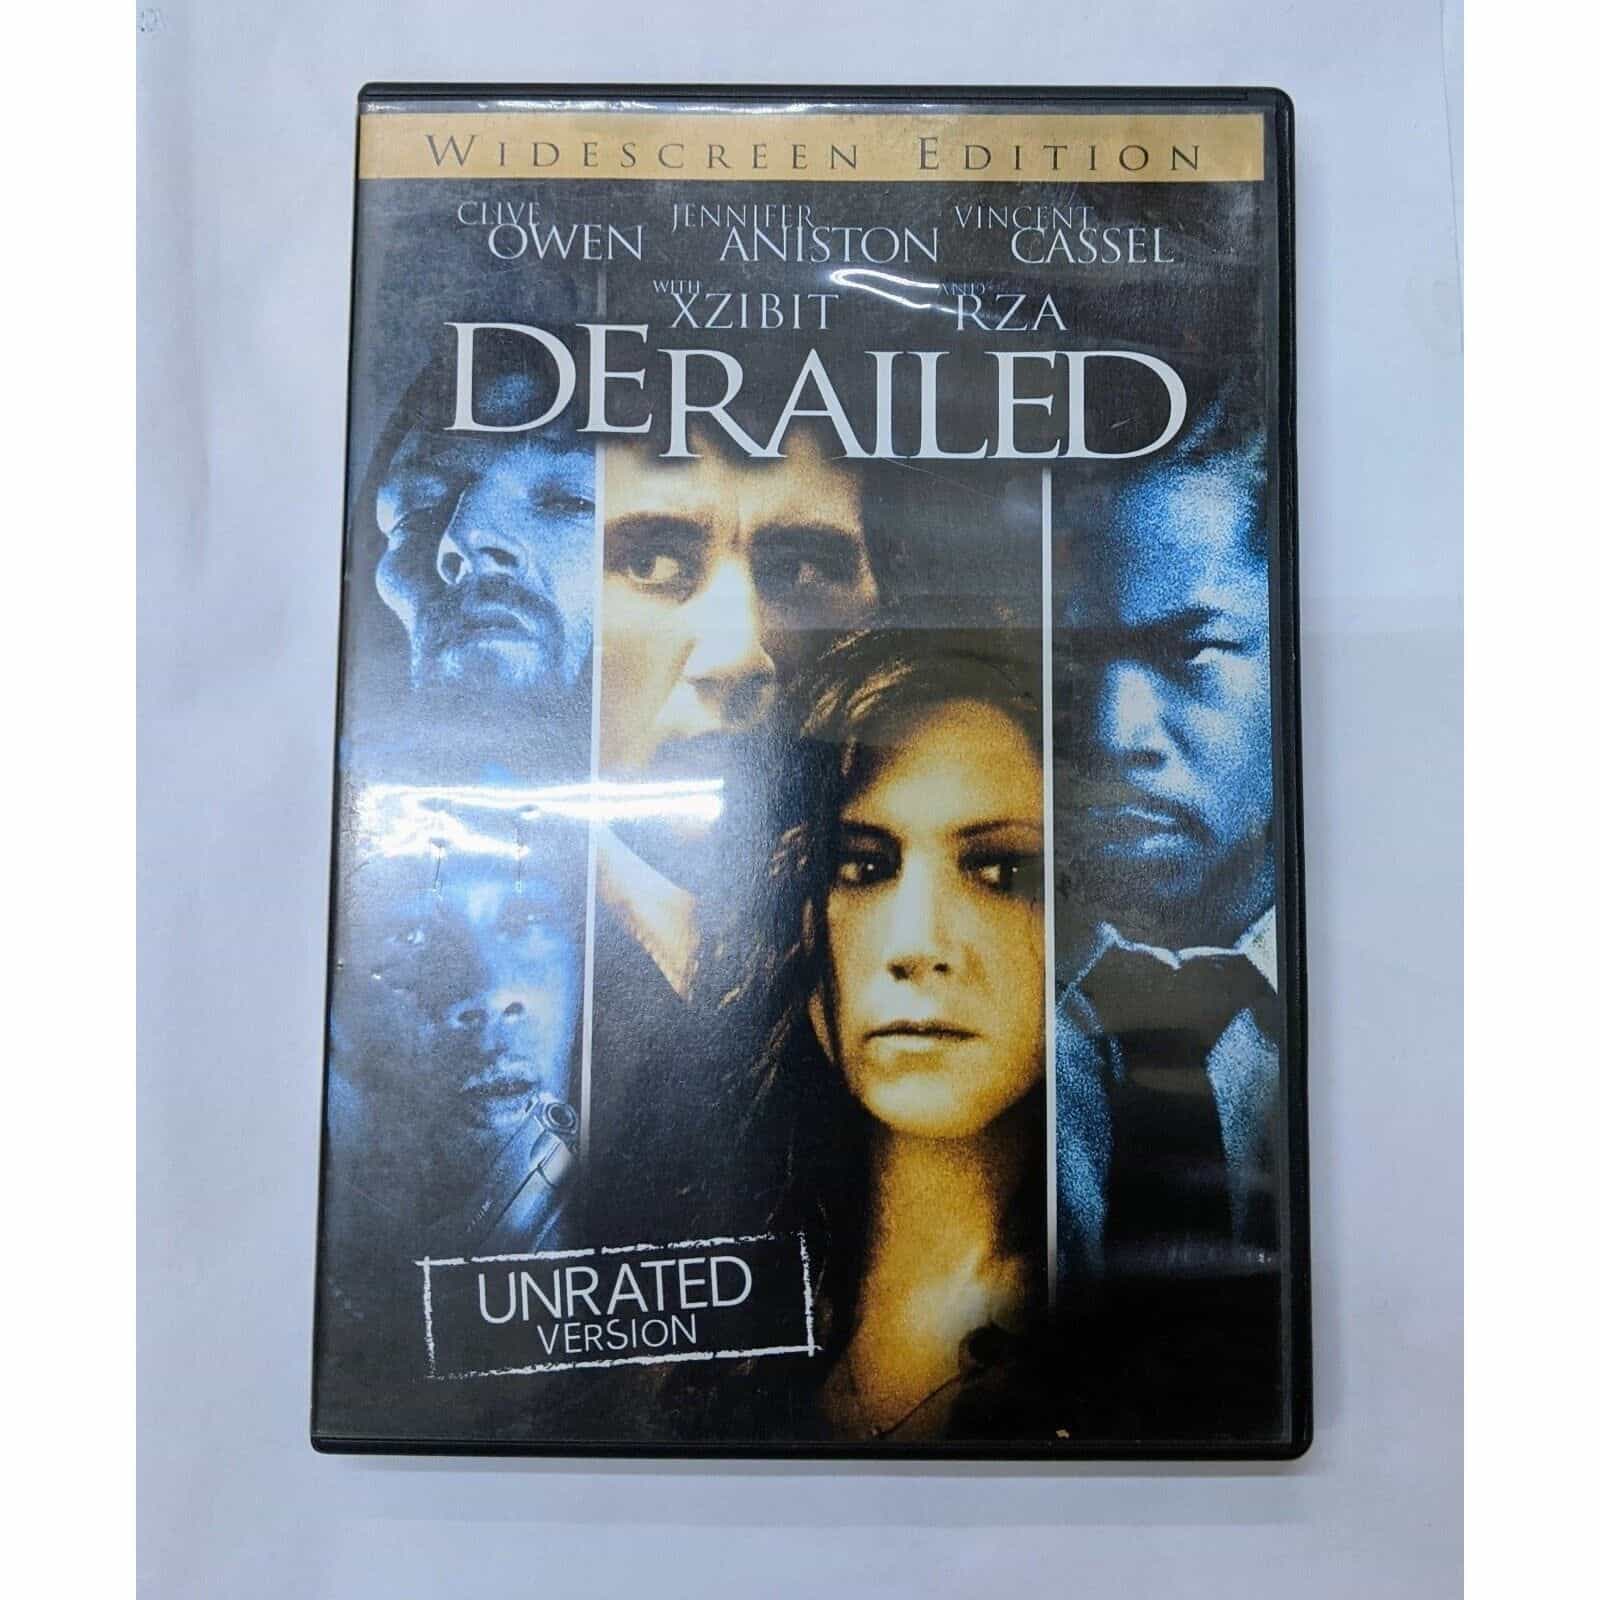 Derailed DVD movie – Unrated Widescreen Edition